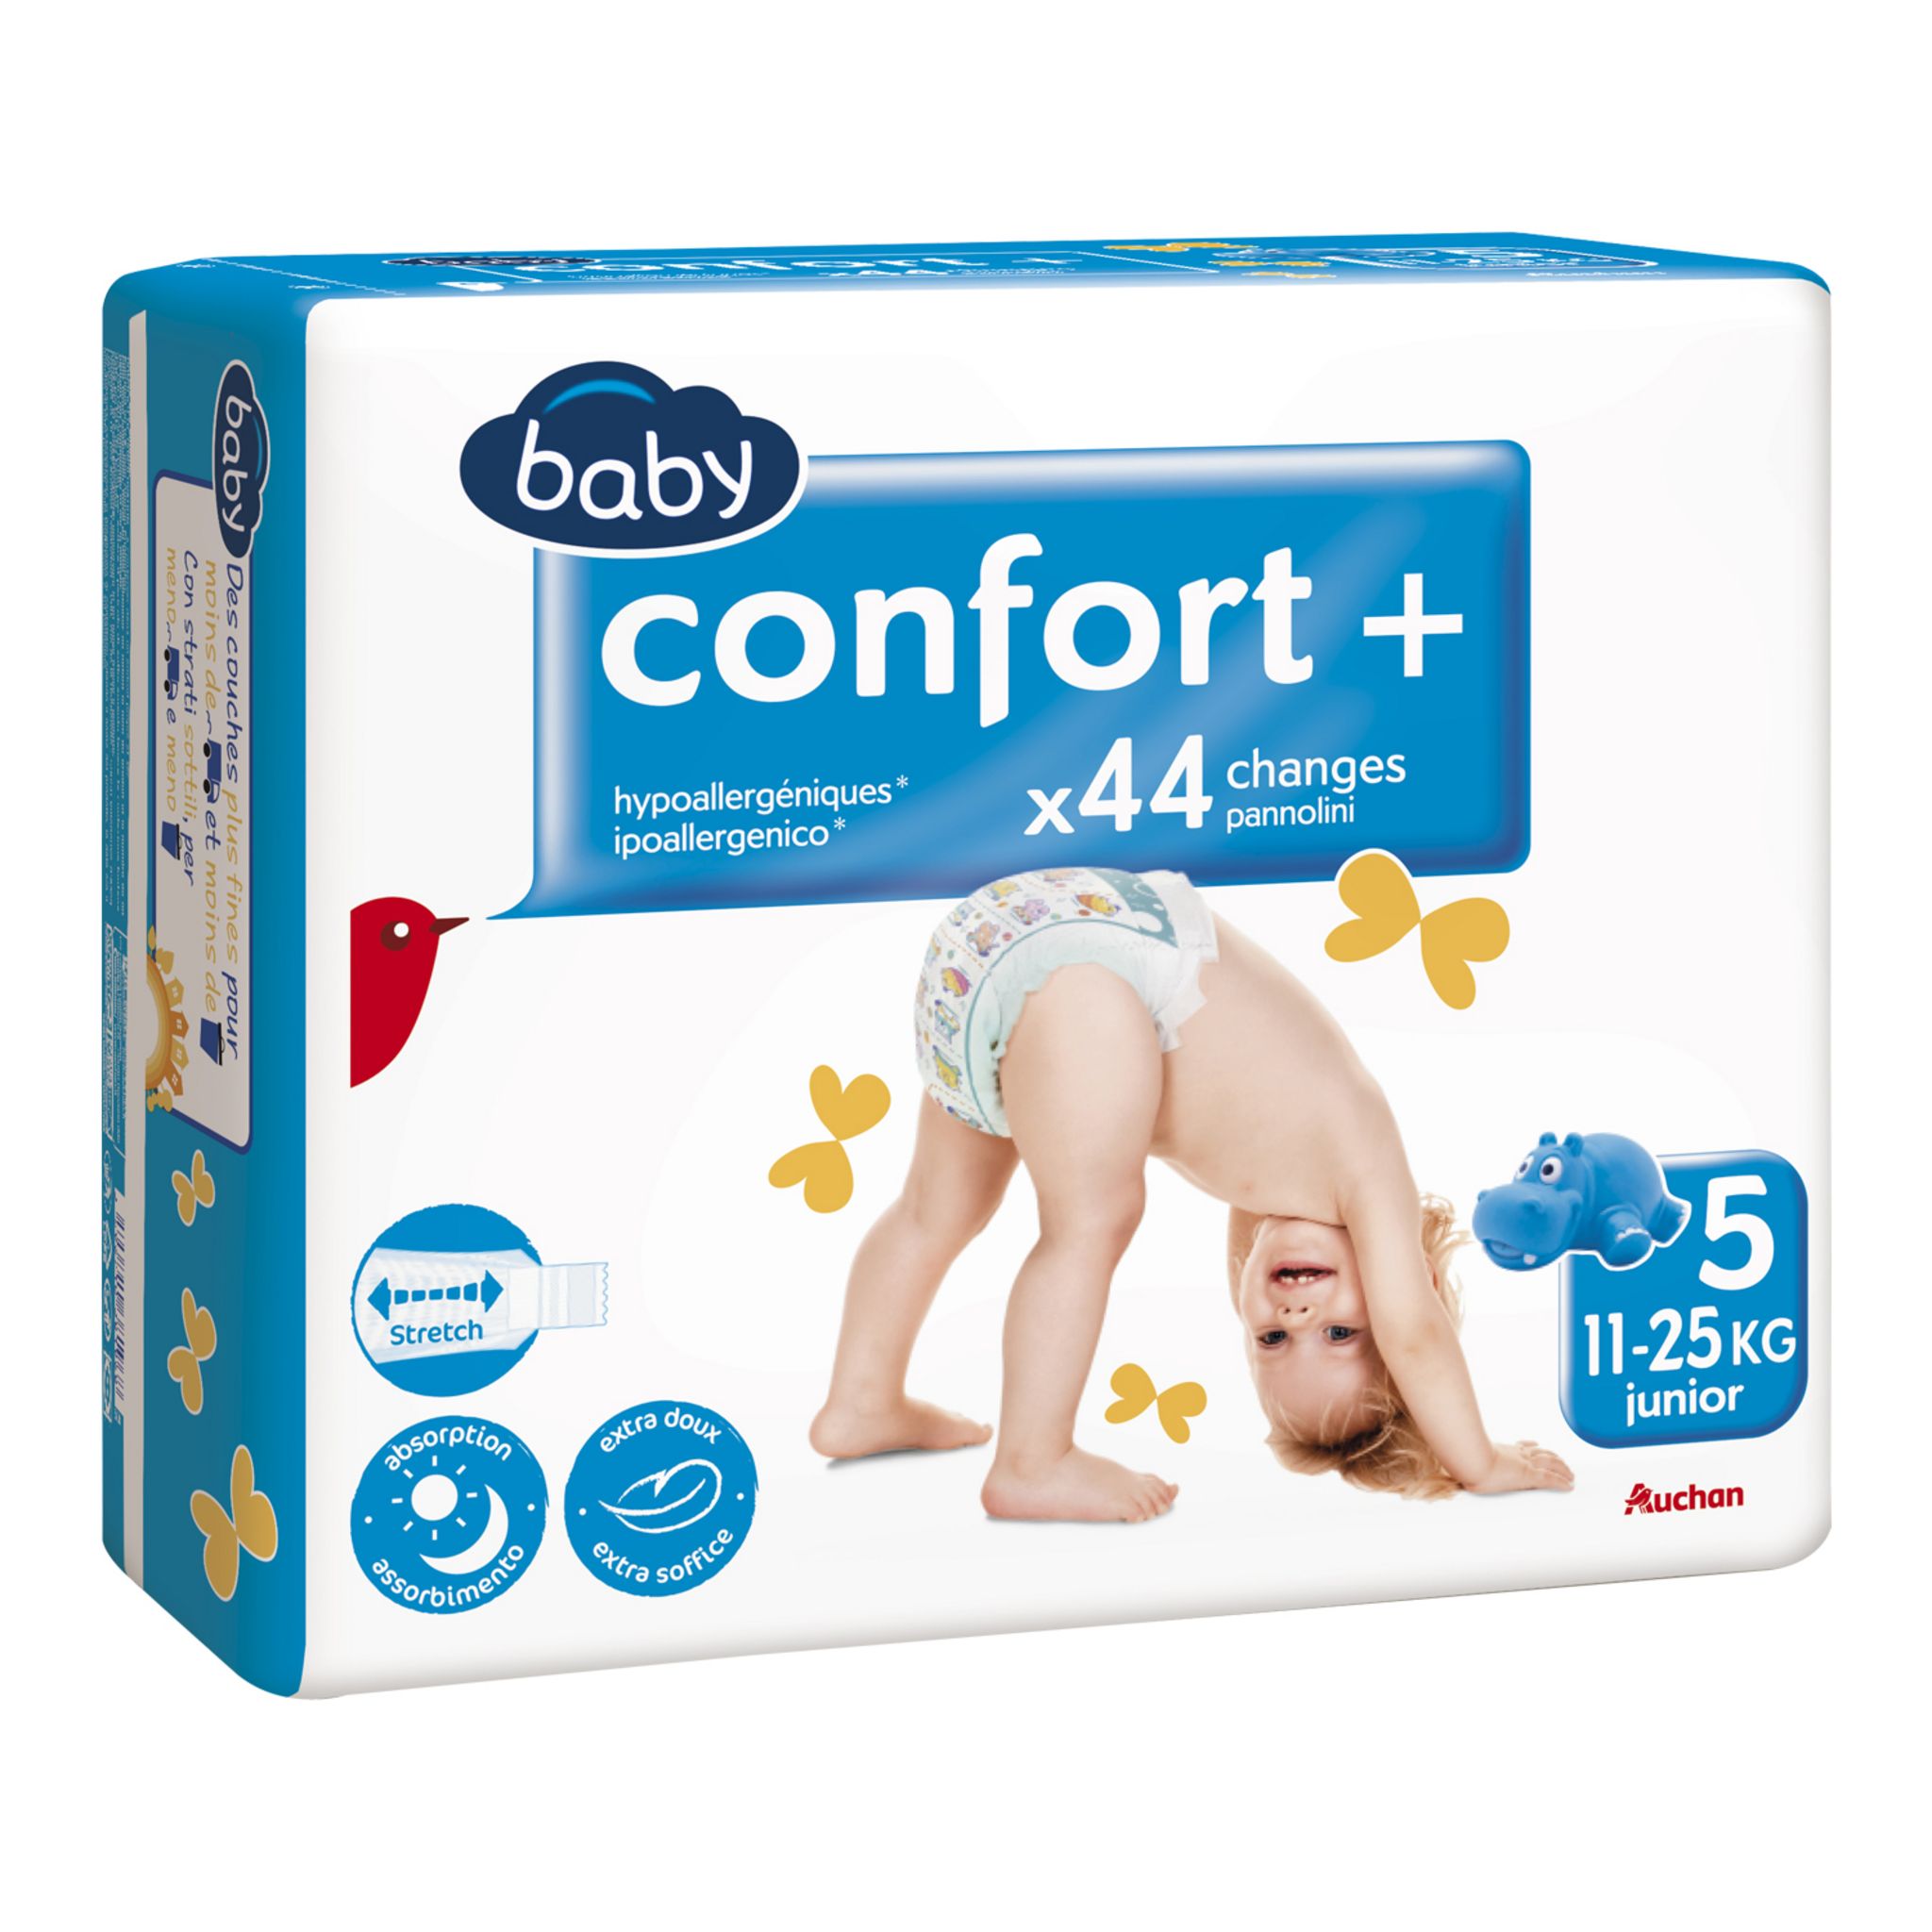 AUCHAN BABY Confort + couches taille 1 (2-5 kg) 22 couches pas